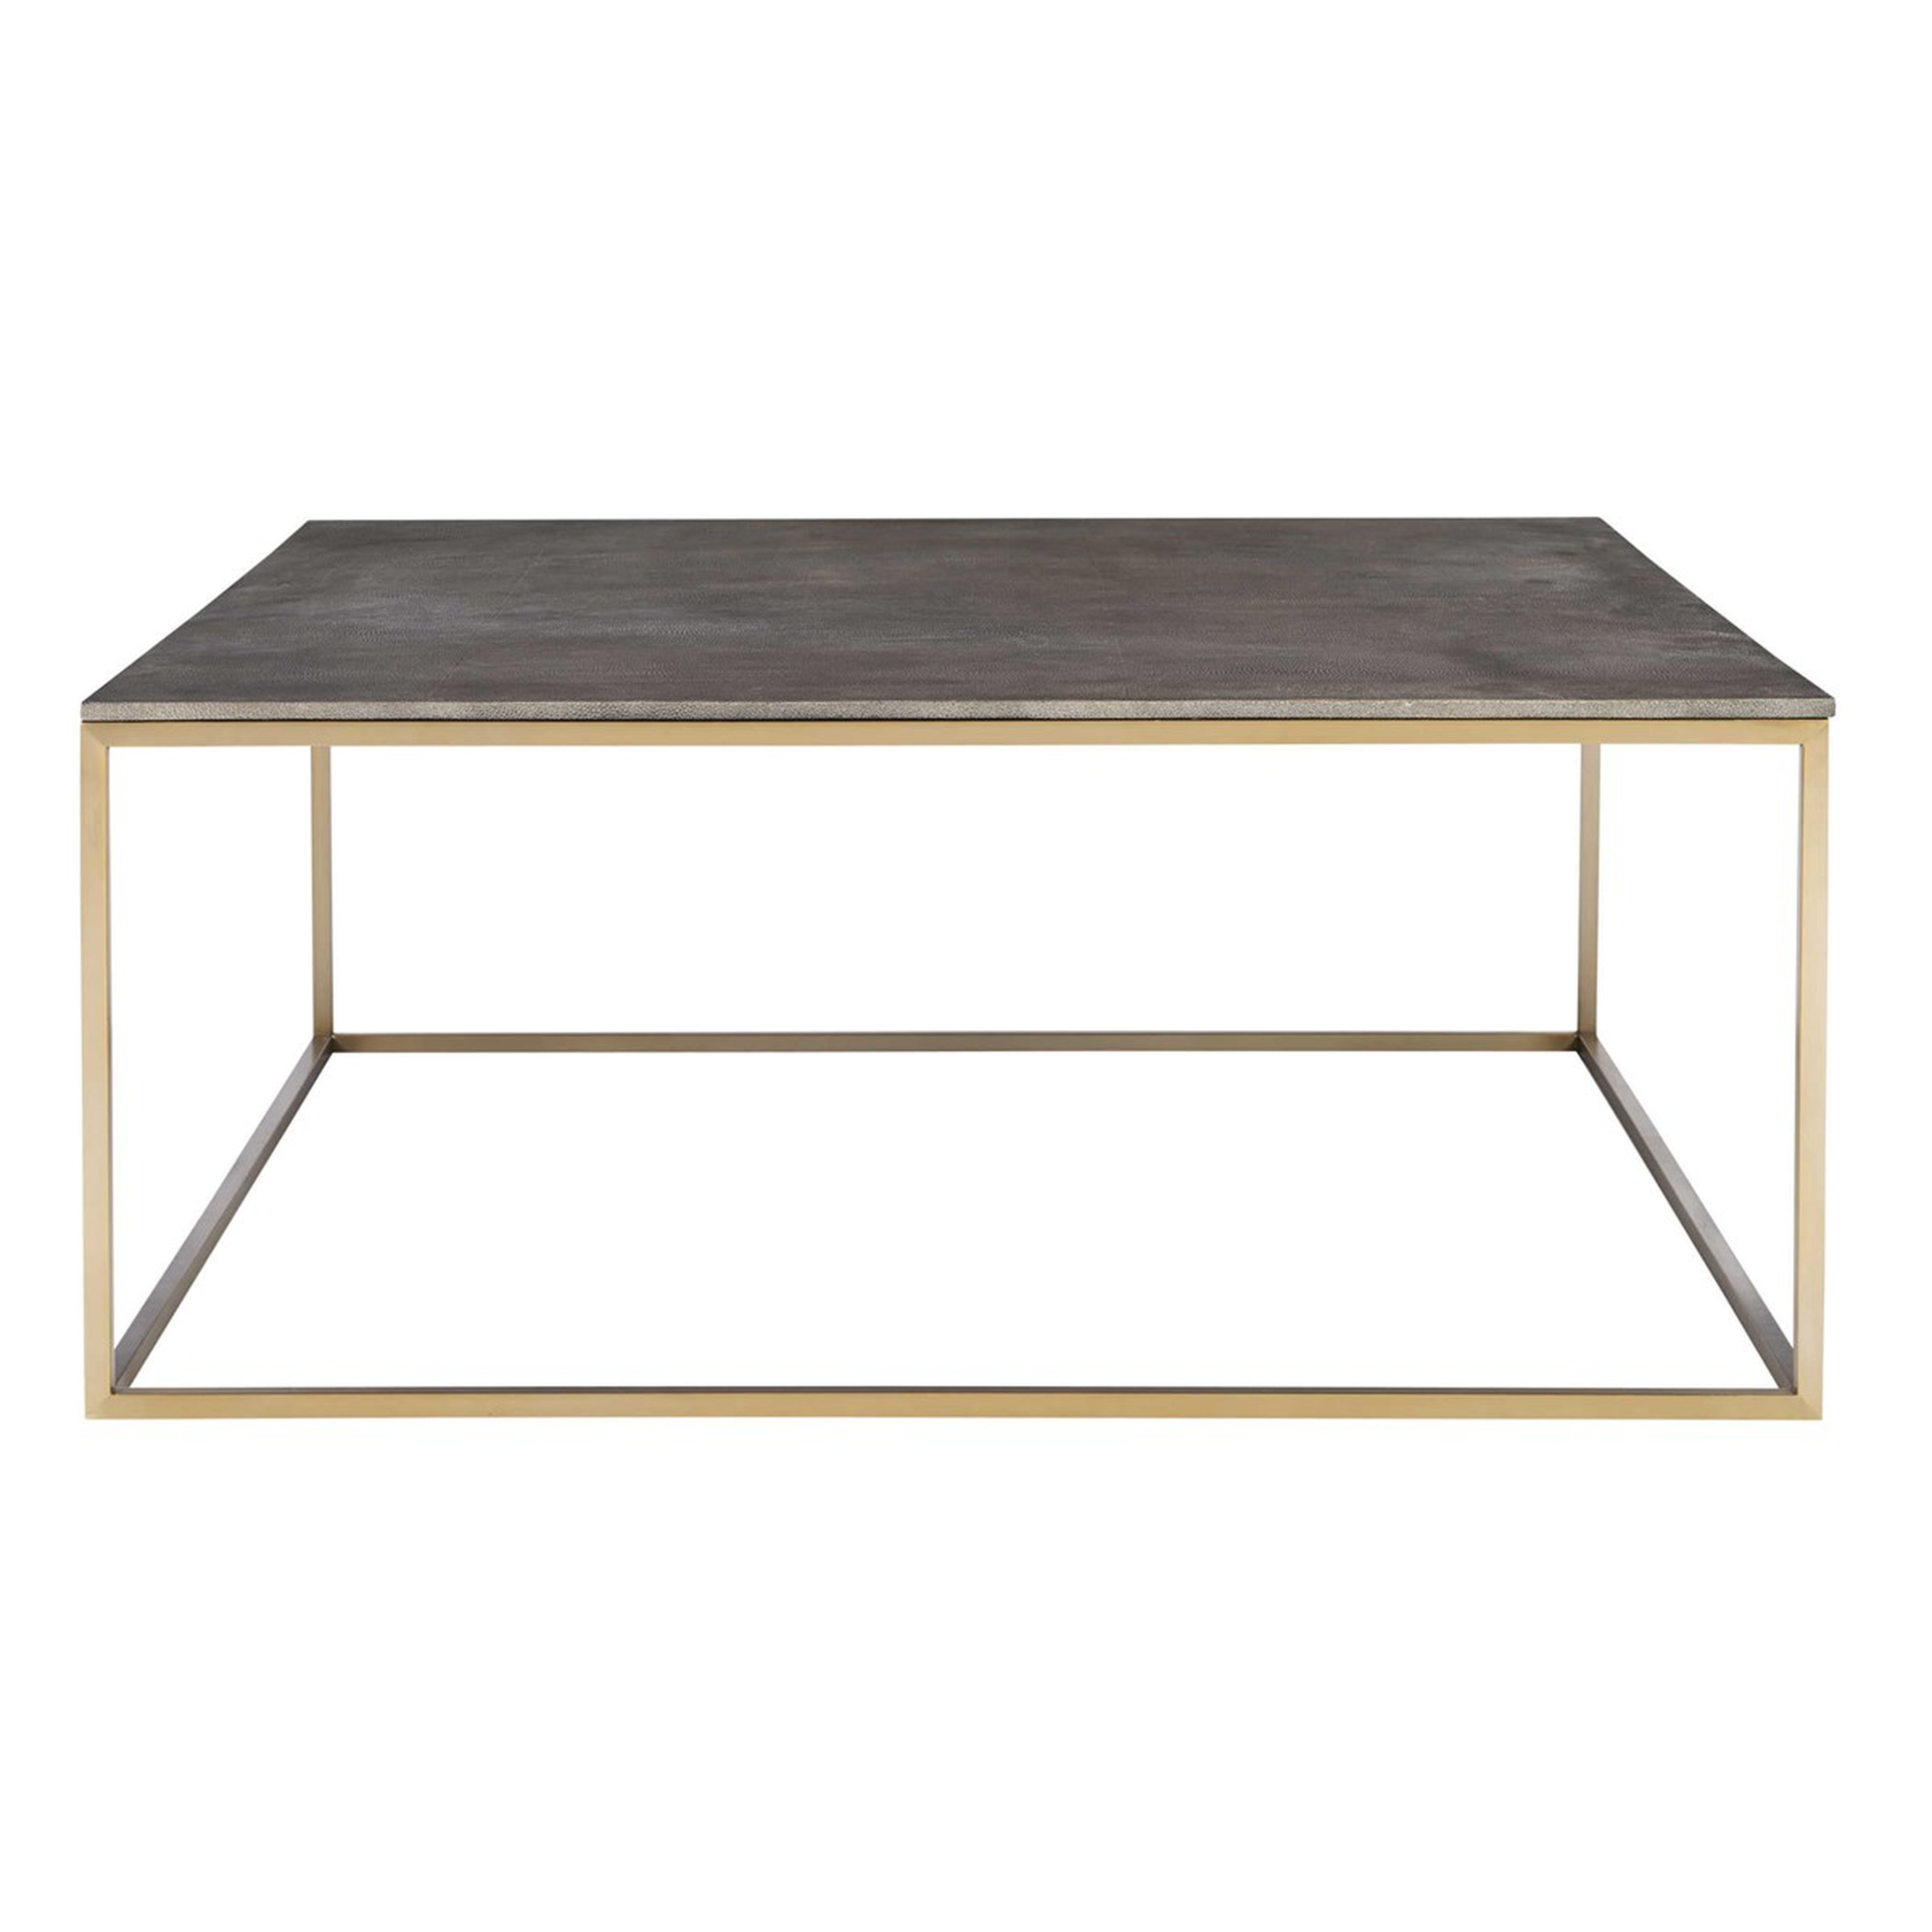 Hudsonhill Foundry Trebon 38"W Charcoal Gray and Brass Coffee Table - Style # 78D48 - Hudsonhill Foundry